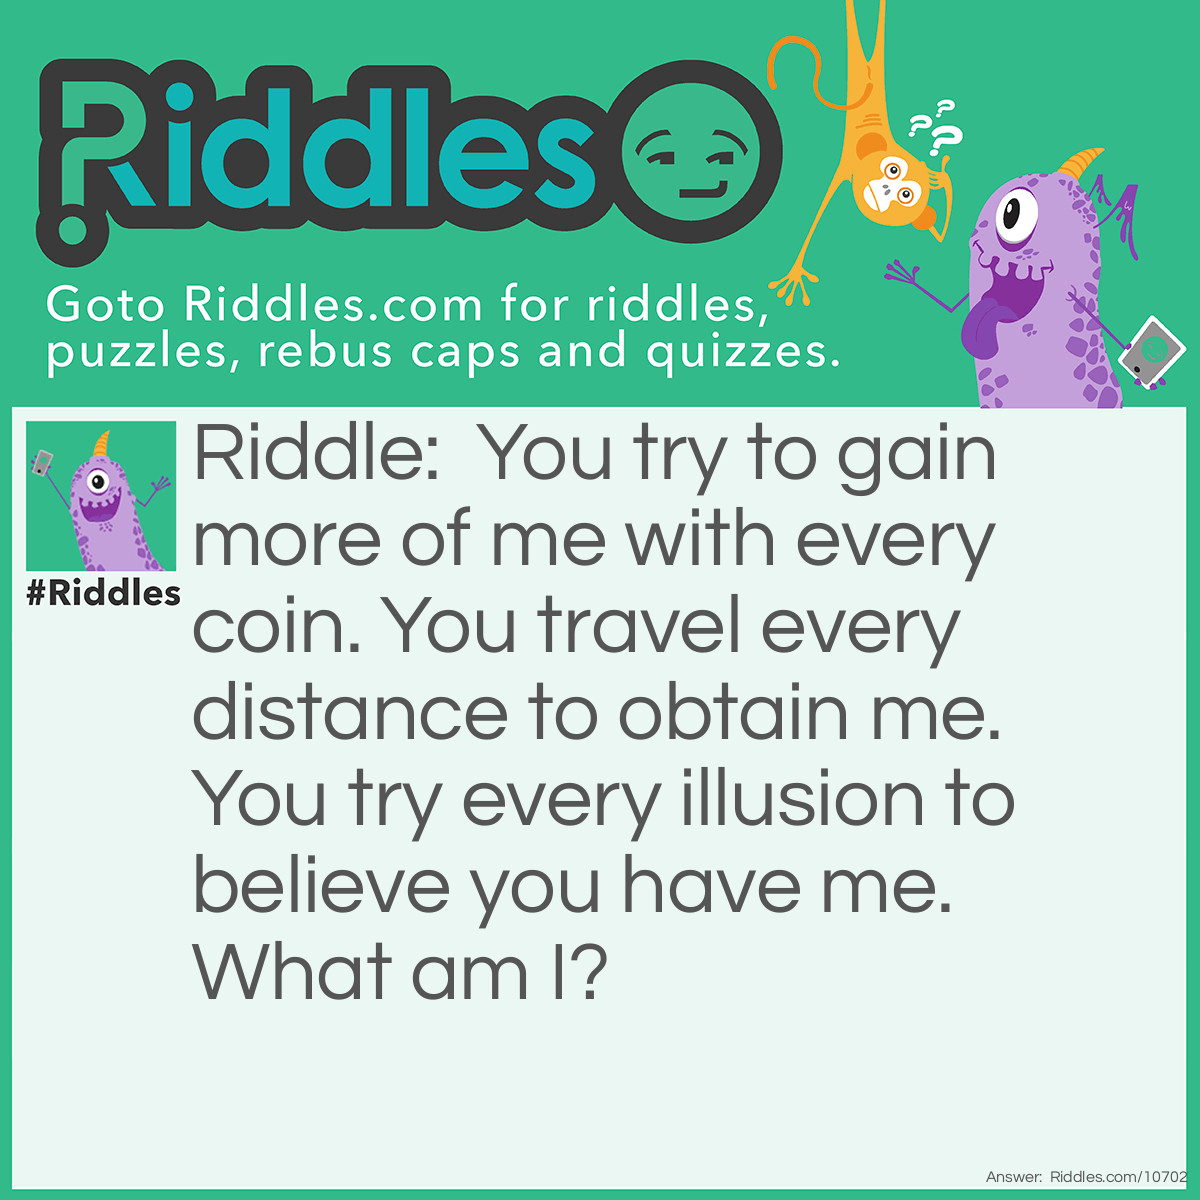 Riddle: You try to gain more of me with every coin. You travel every distance to obtain me. You try every illusion to believe you have me. What am I? Answer: Freedom.